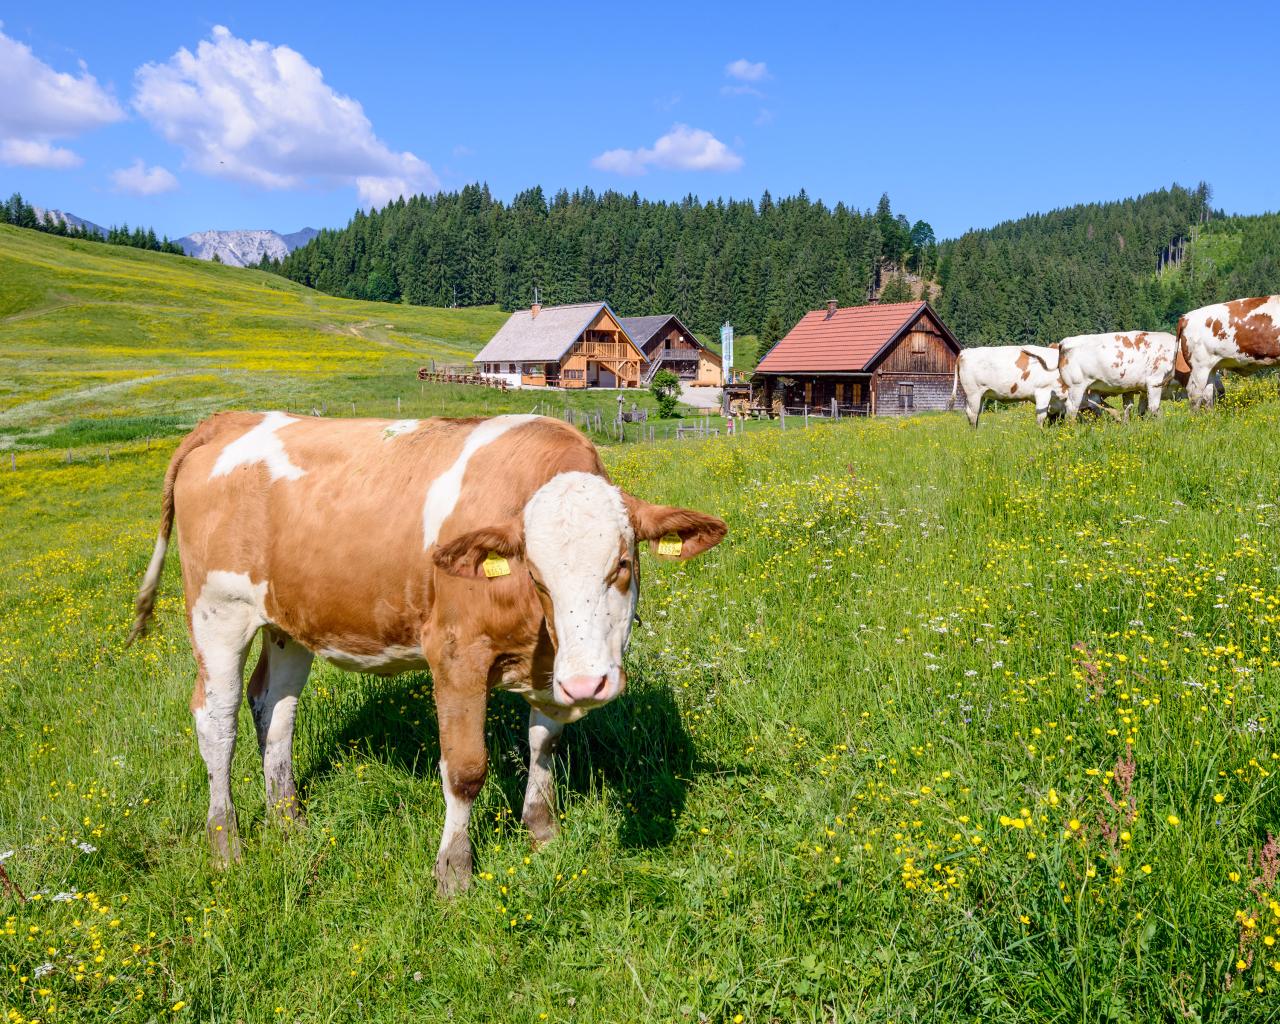 In front of an alpine pasture building, cows graze on a blooming summer meadow